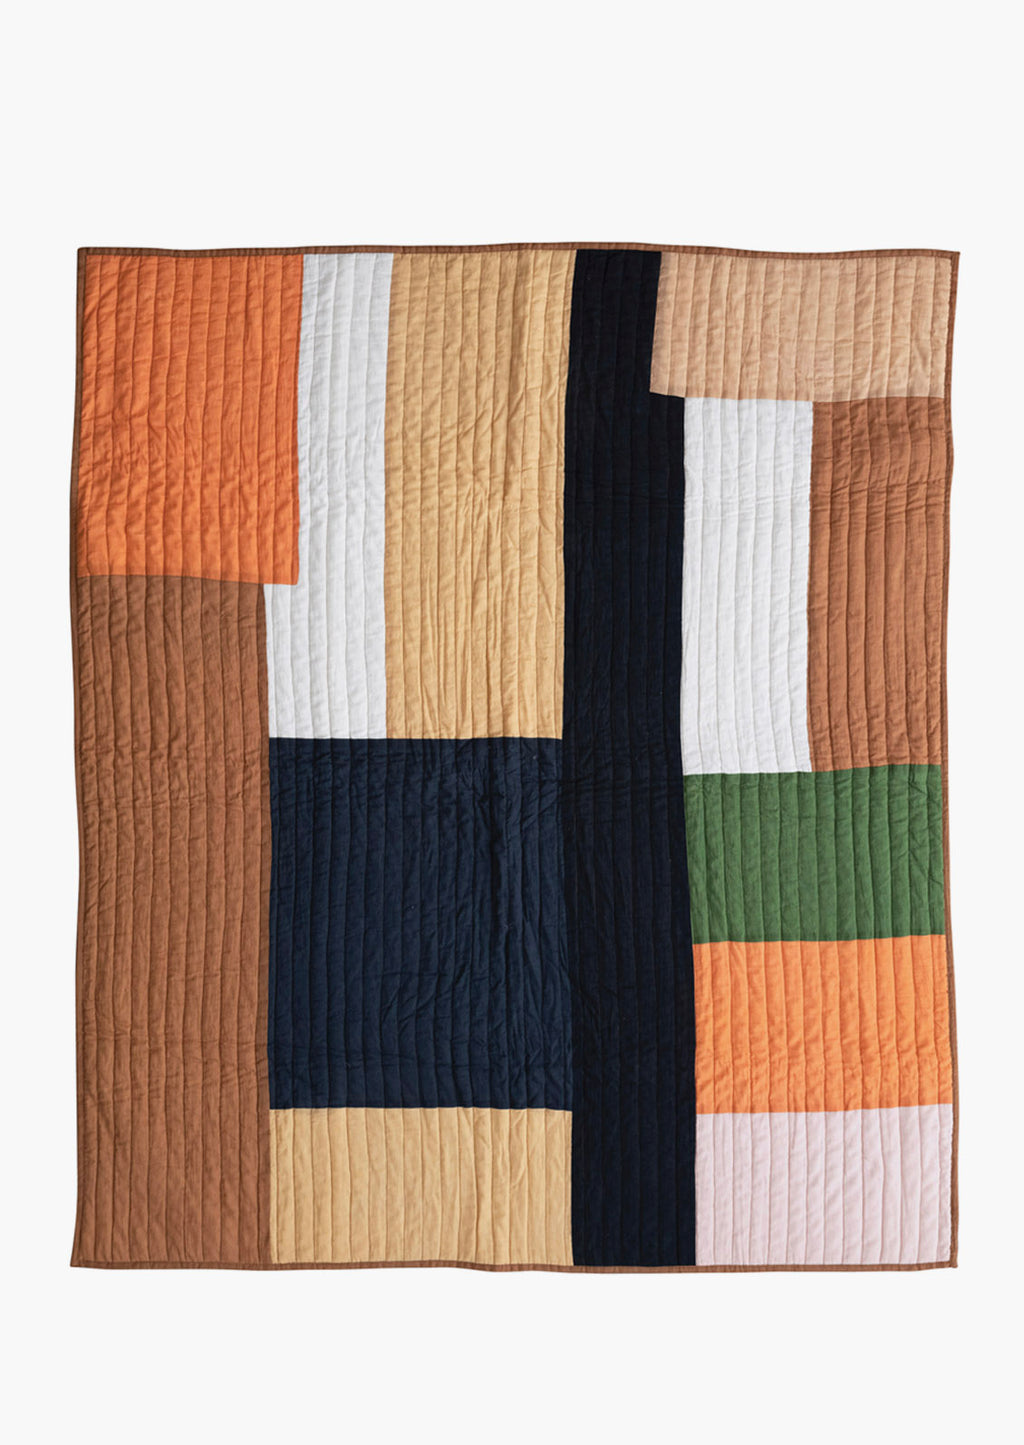 2: A paneled patchwork quilt in orange and brown tones.